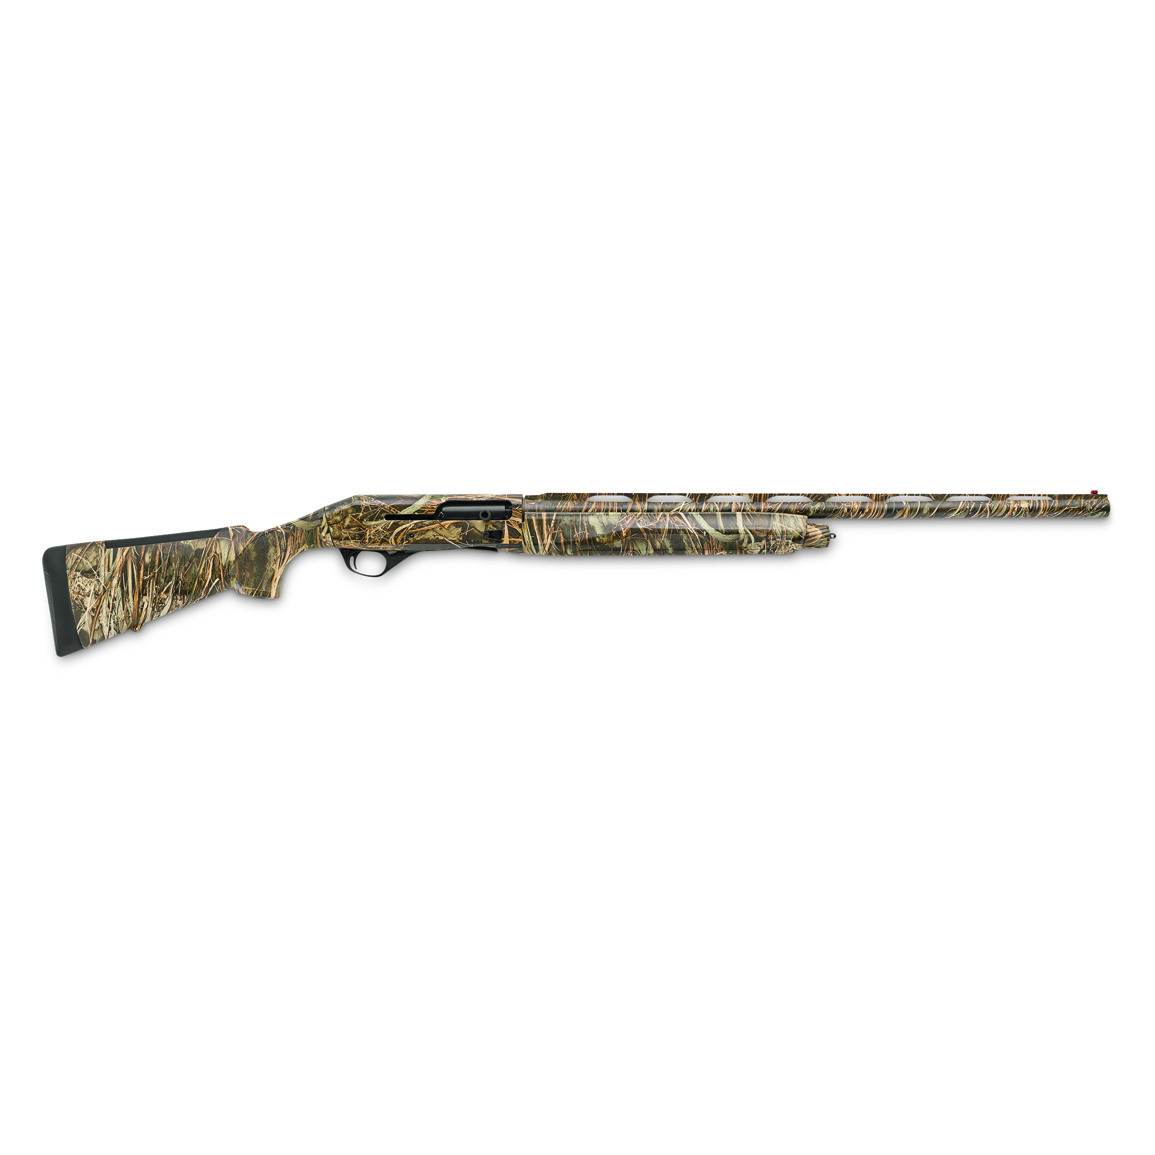 Stoeger M3500, Semi-automatic, 12 Gauge, 26" Barrel, Realtree MAX-7 Stock, 4+1 Rounds